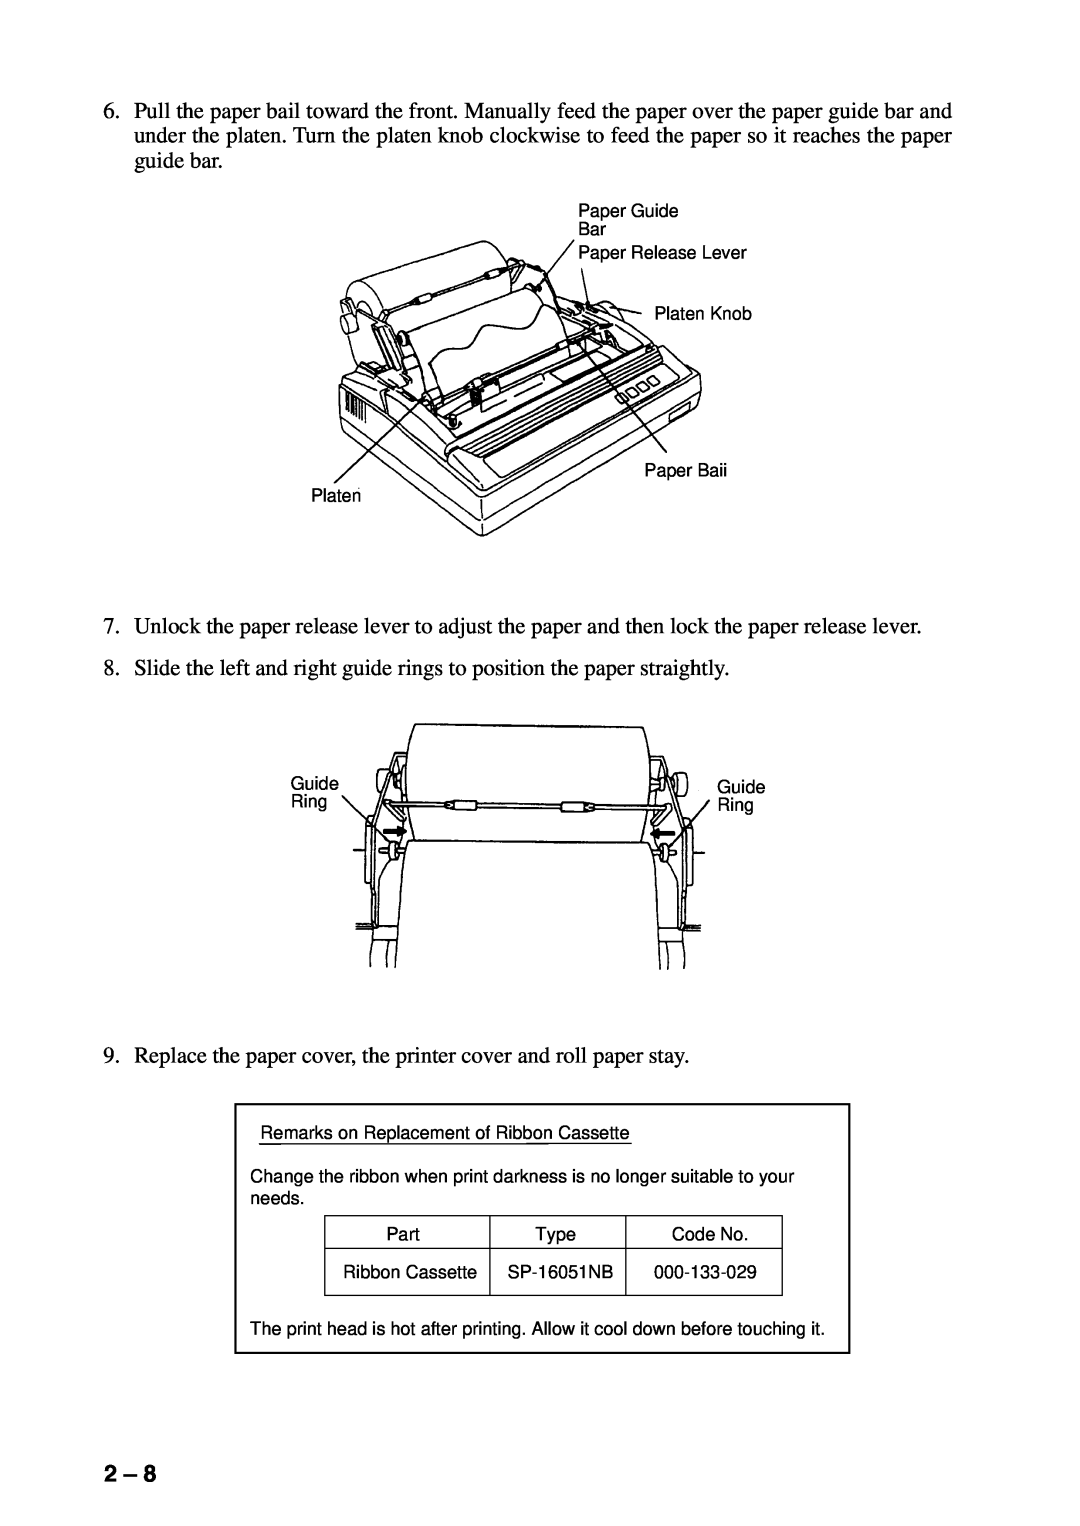 Furuno RC-1500-1T manual Replace the paper cover, the printer cover and roll paper stay 